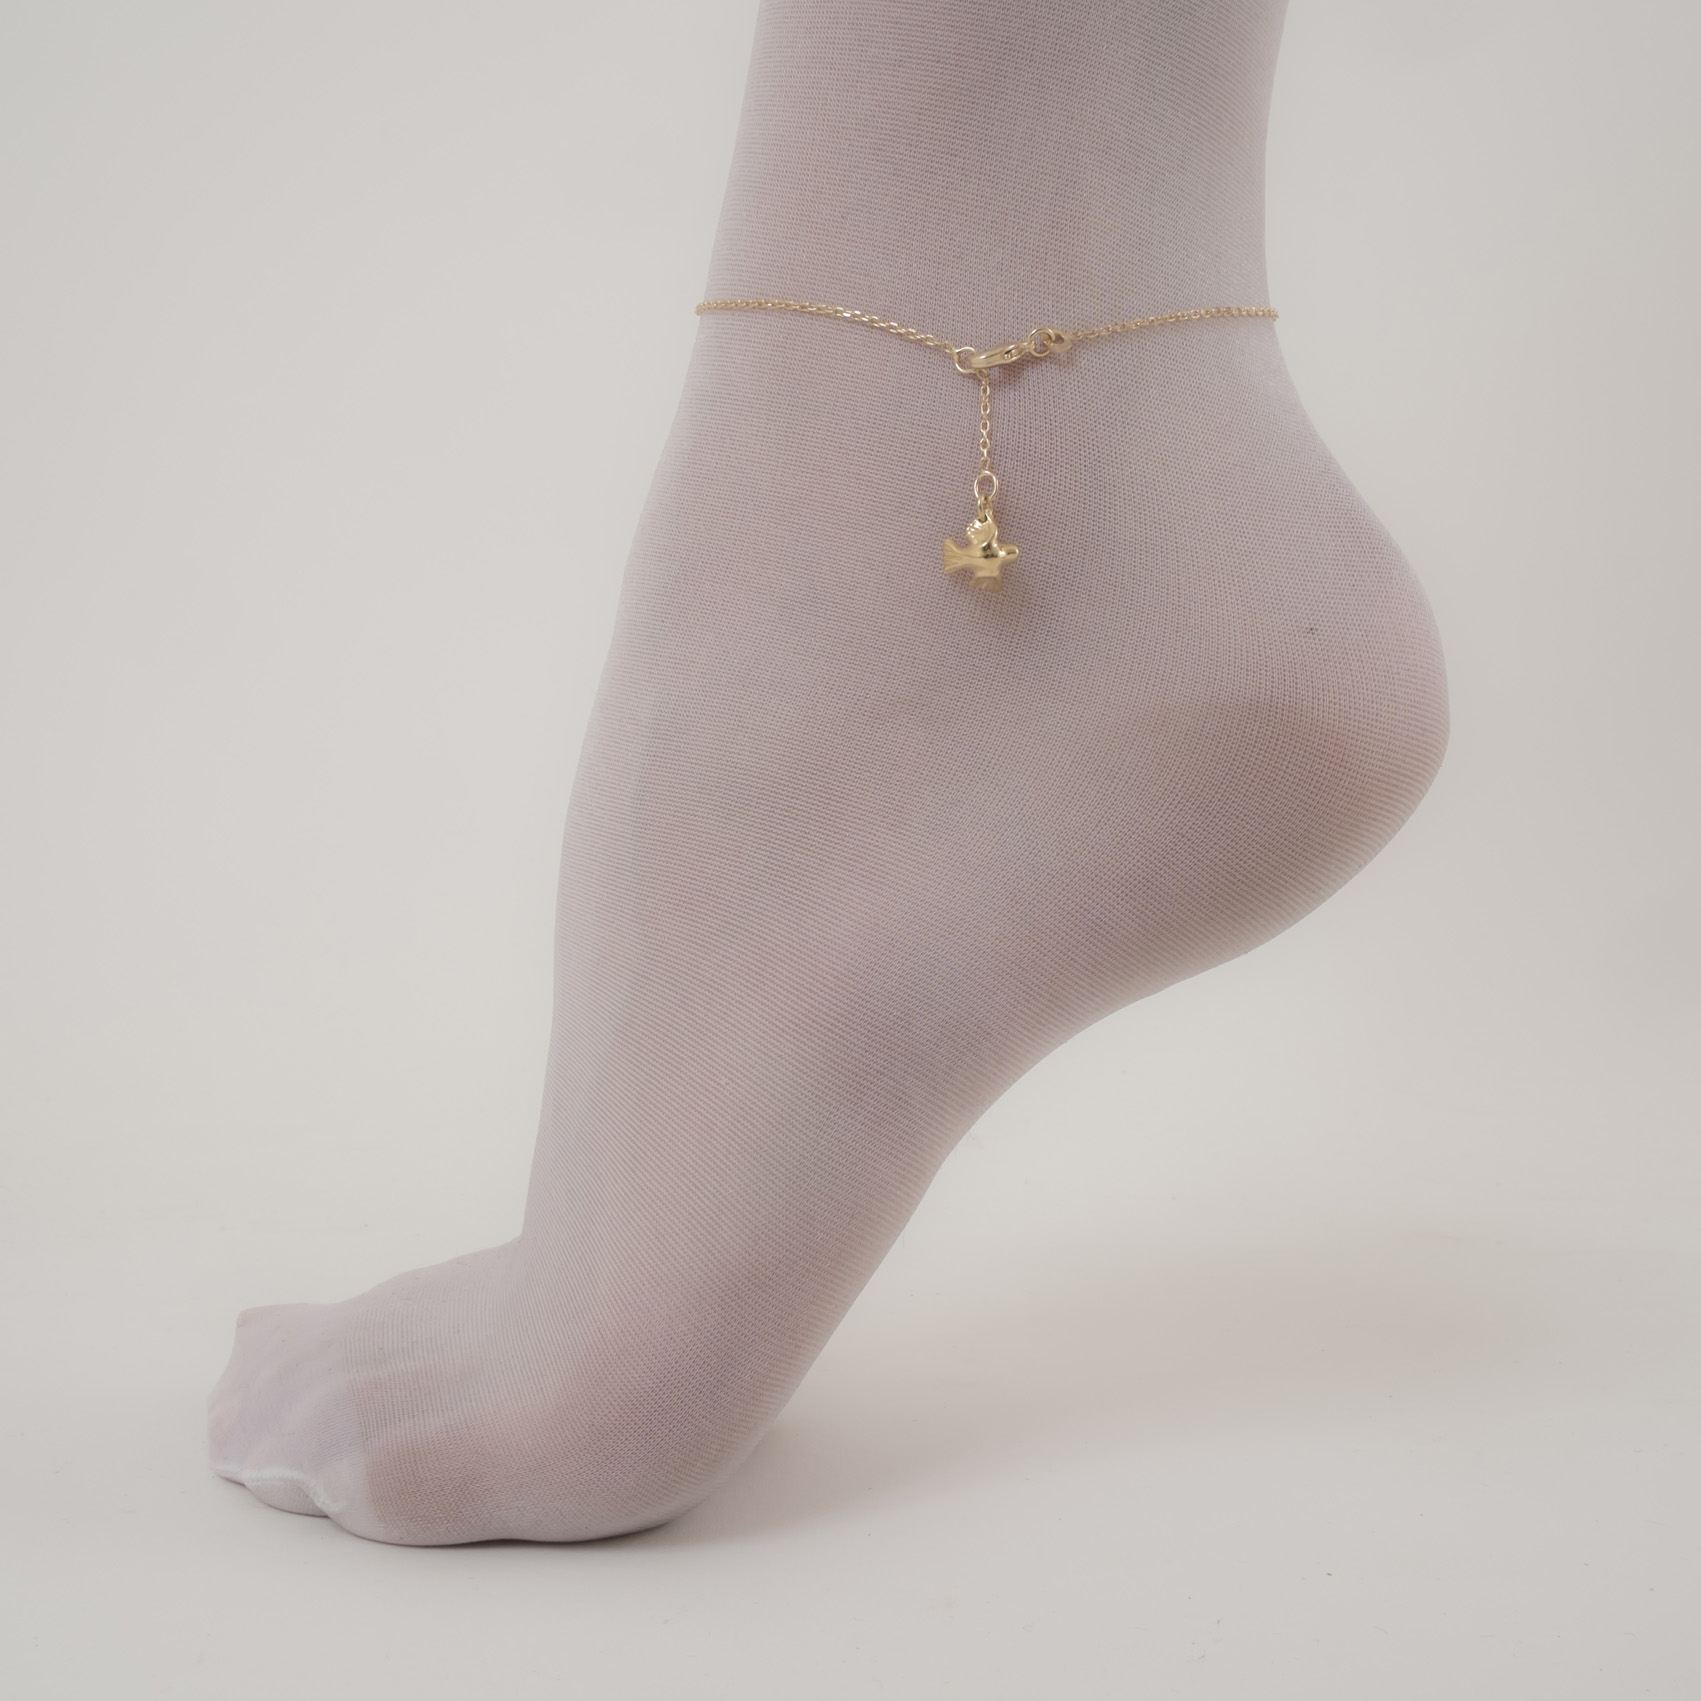 CHC51 Gold Wrist or Ankle Chain with Bird Pendant